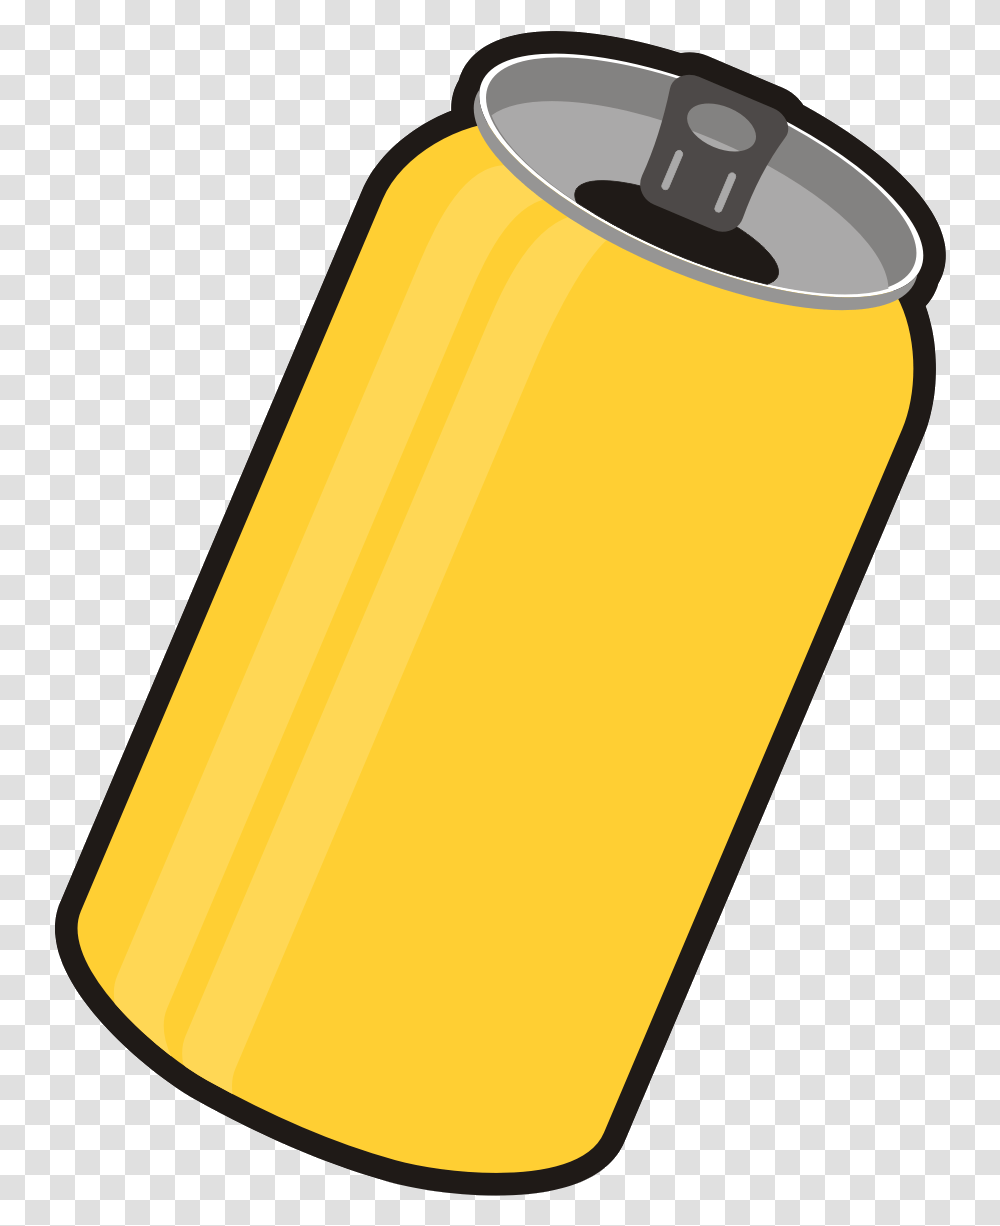 Soda Can Vector At Free For Personal Use Soda Can Vector, Tin, Cylinder, Beverage, Drink Transparent Png